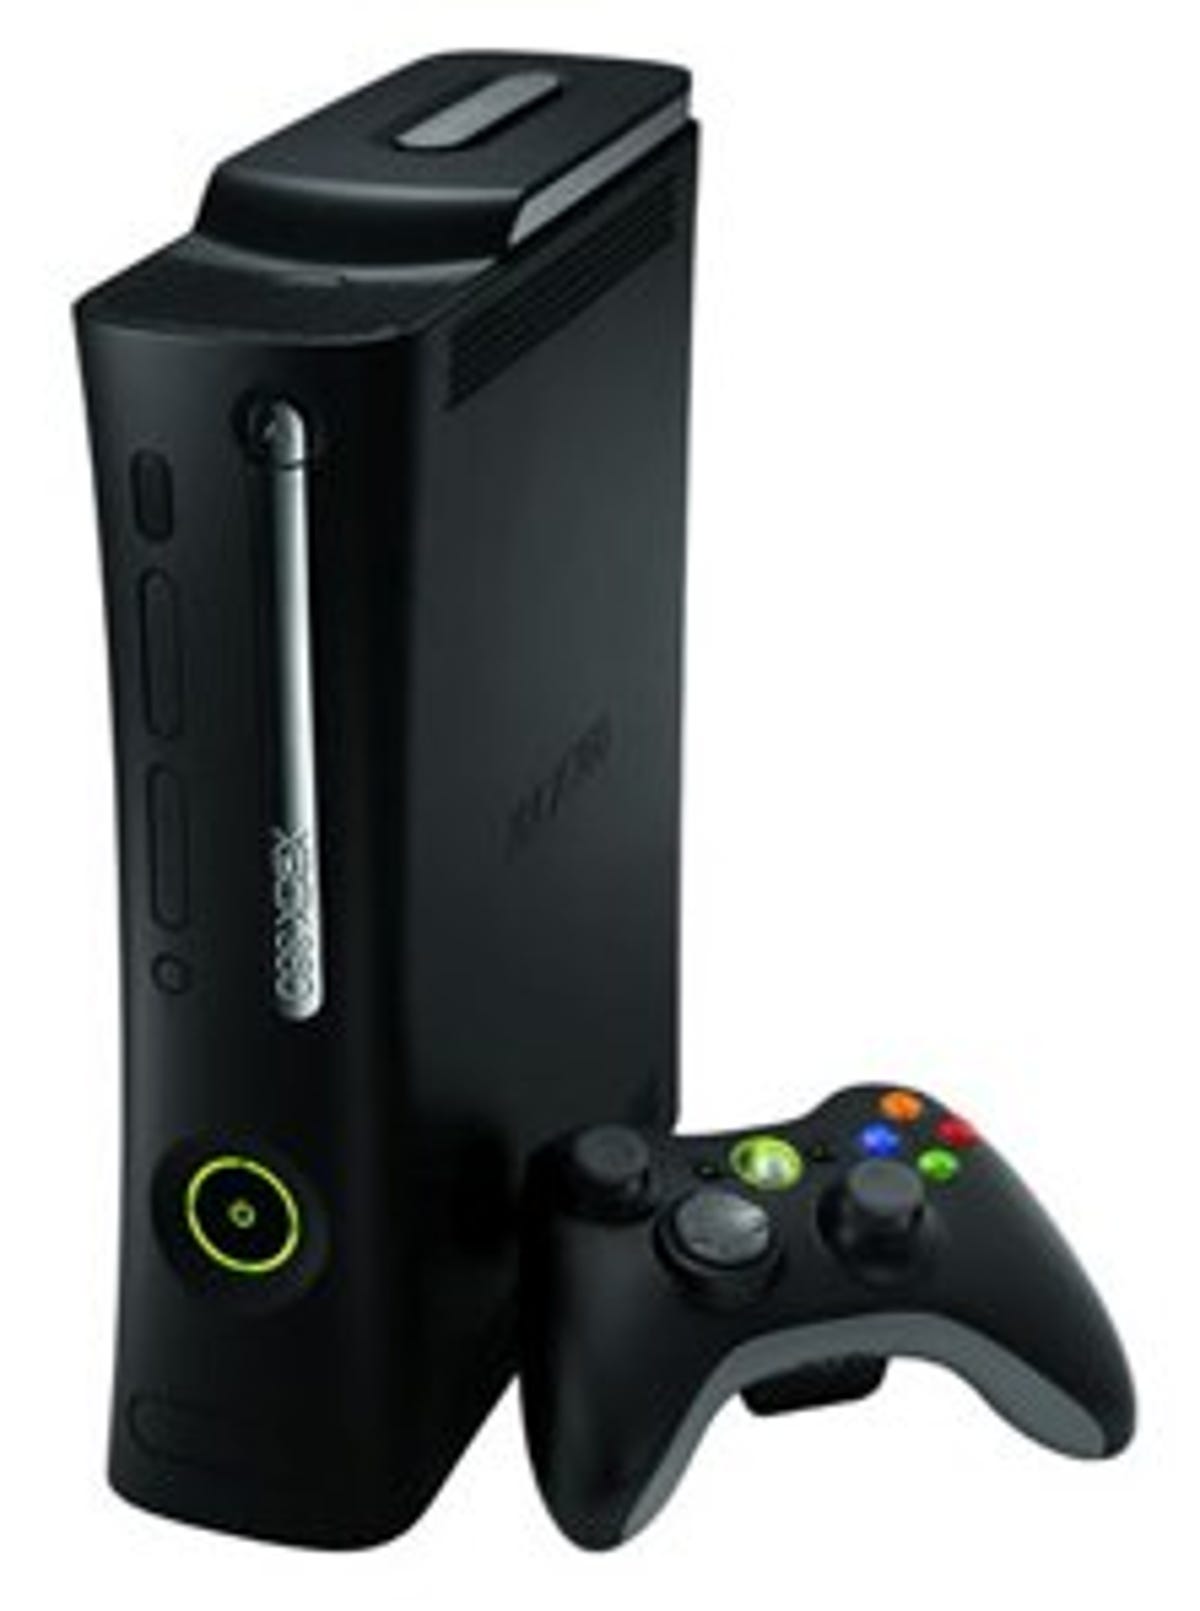 Don't expect the Xbox 720 anytime soon.